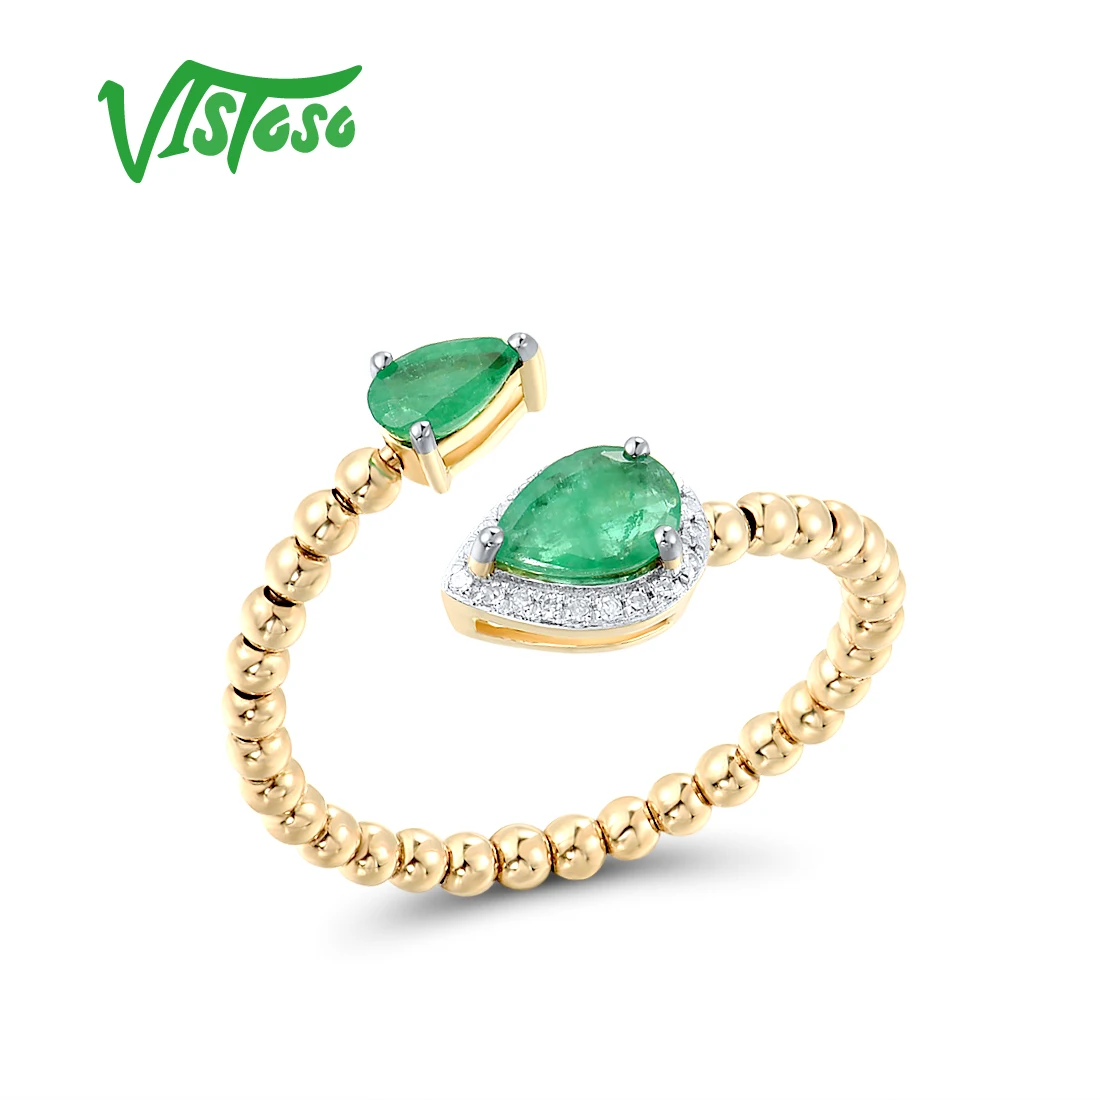 VISTOSO Genuine 14K 585 Yellow Gold Rings For Women Sparkling Emerald Diamond Adjustable Open Rings Daily Wear Fine Jewelry